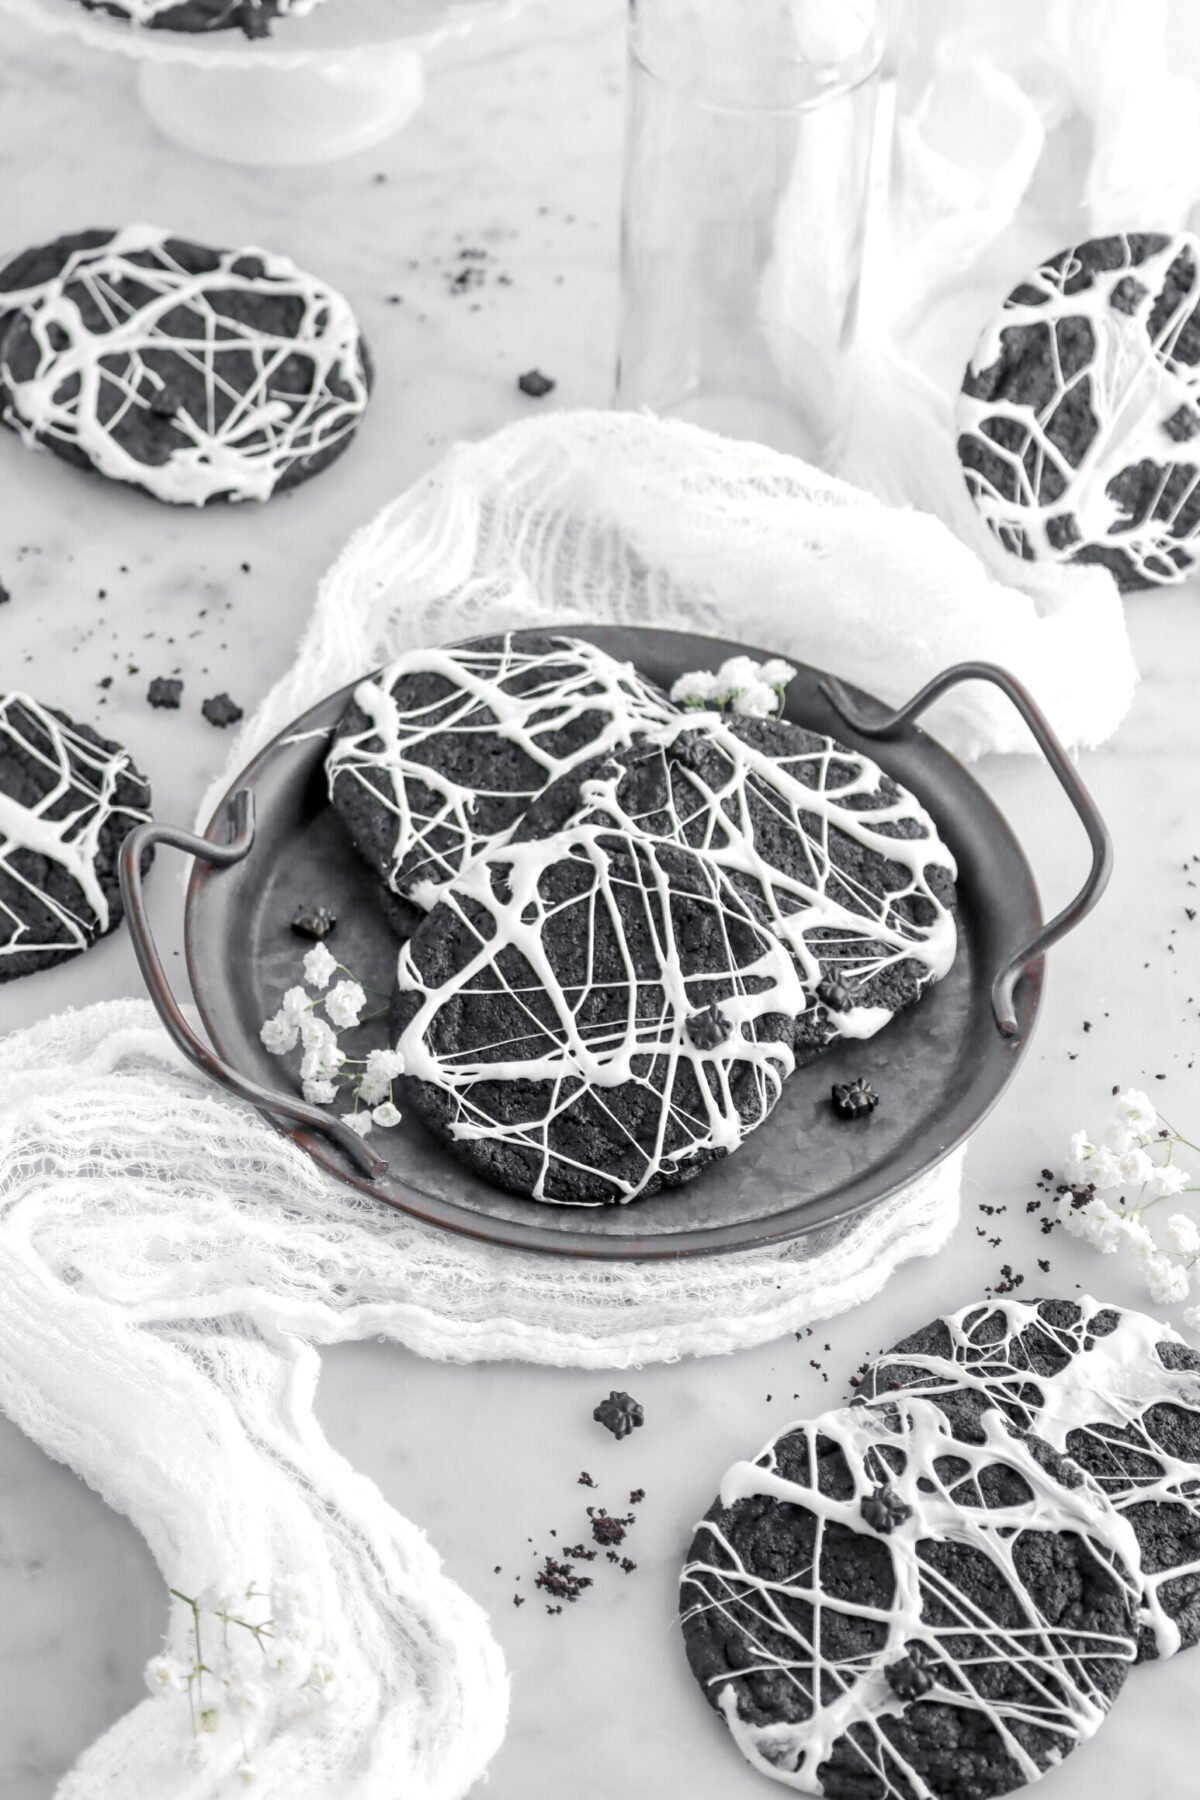 angled image of three spider web cookies on metal tray with white flowers around on marble surface.